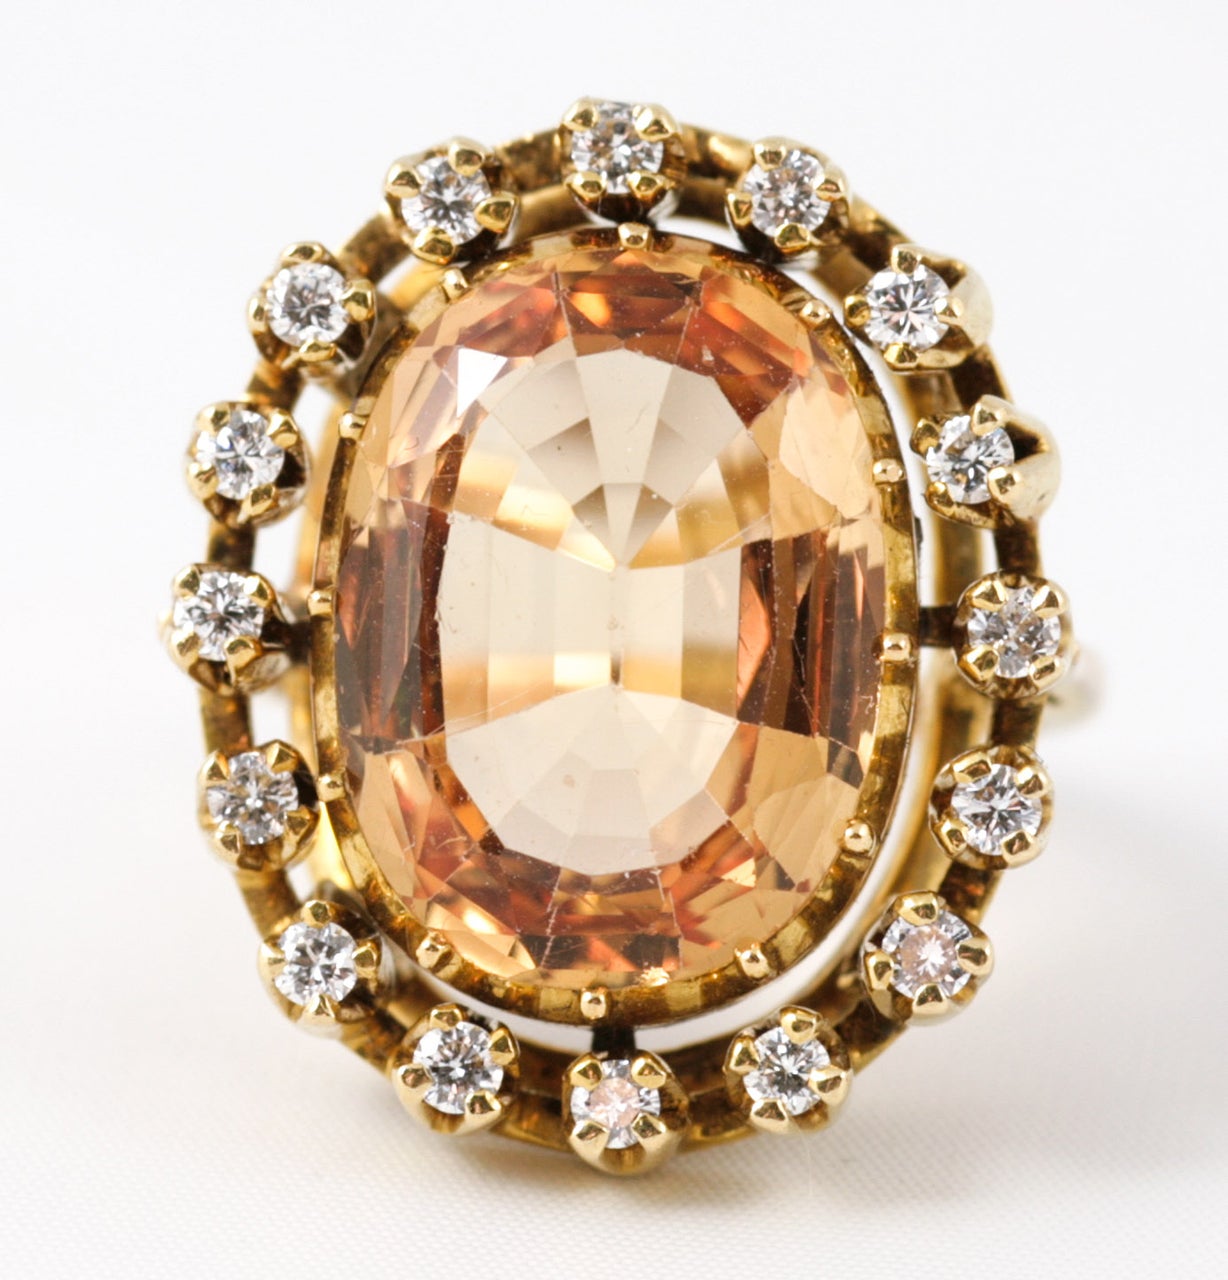 Oval Imperial Topaz surrounded by small Diamonds on a Gold shank